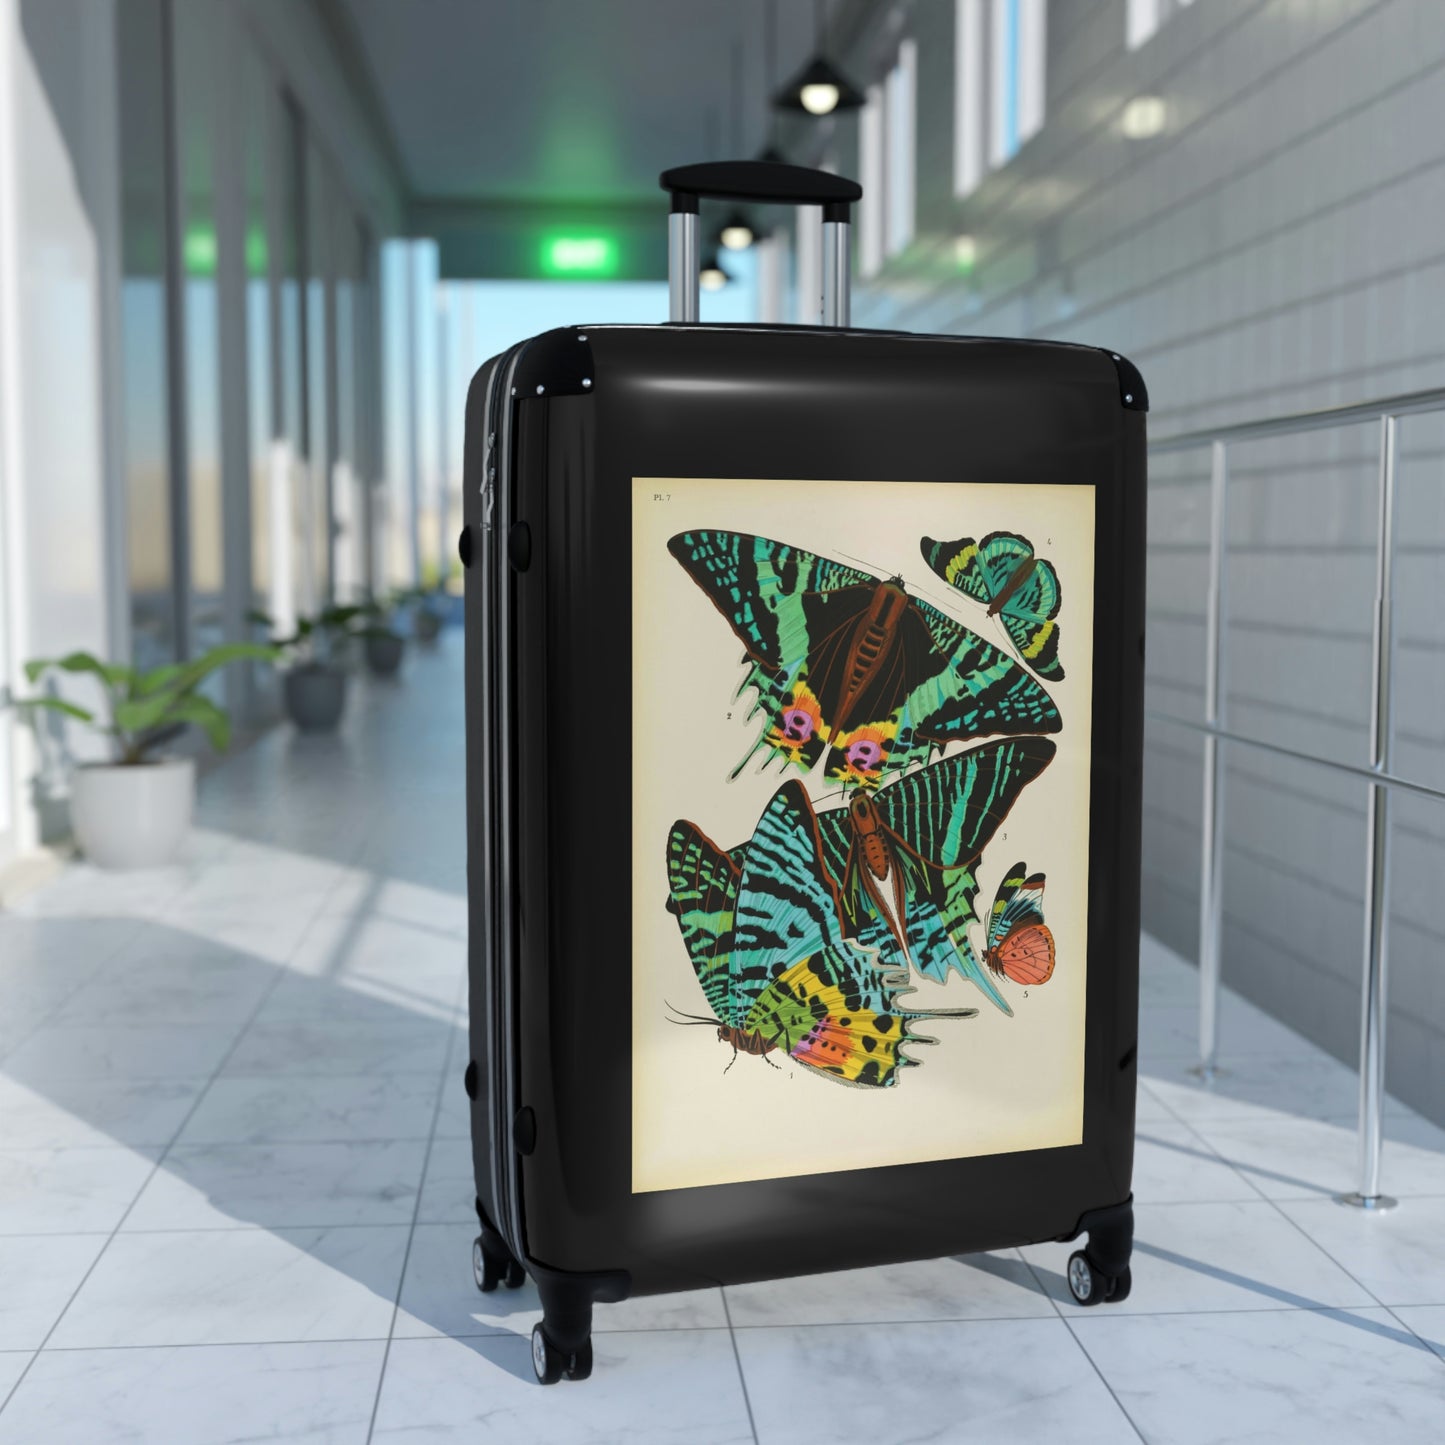 Getrott Butterflies Macrolepidopteran Rhopalocera Lepidoptera Black Red Yellow Cabin Suitcase Rolling Luggage Extended Storage Adjustable Telescopic Handle Double wheeled Polycarbonate Hard-shell Built-in Lock-Bags-Geotrott